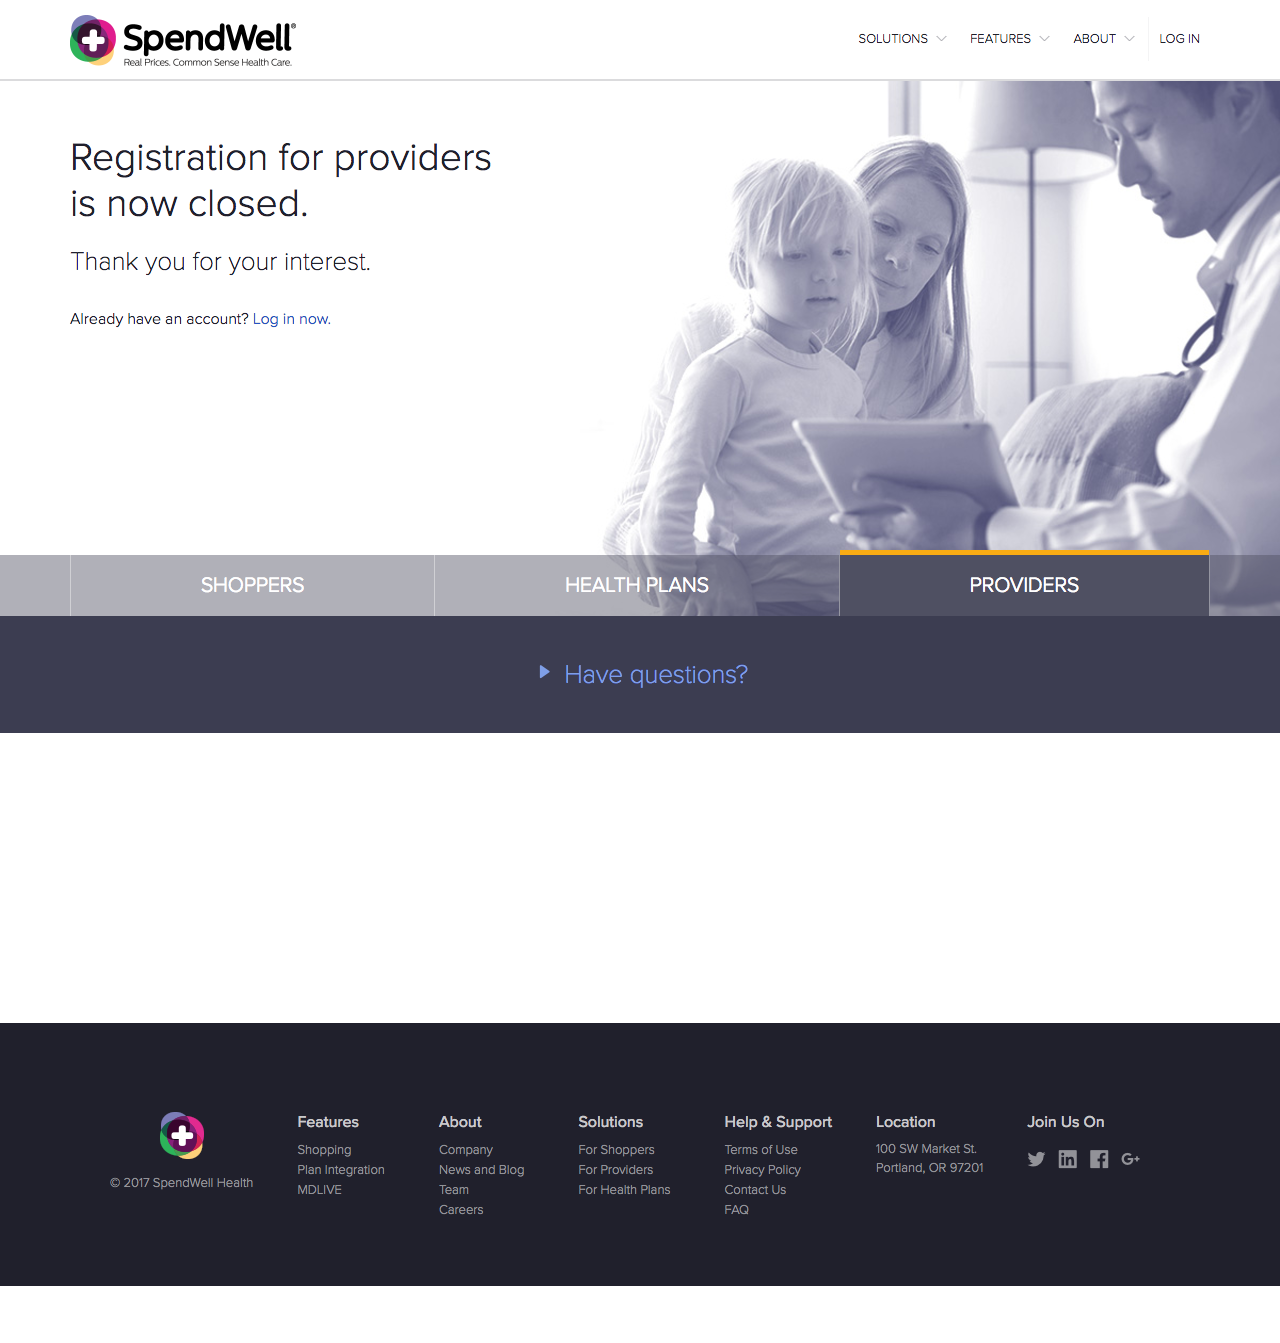 SpendWell Health marketing site providers page